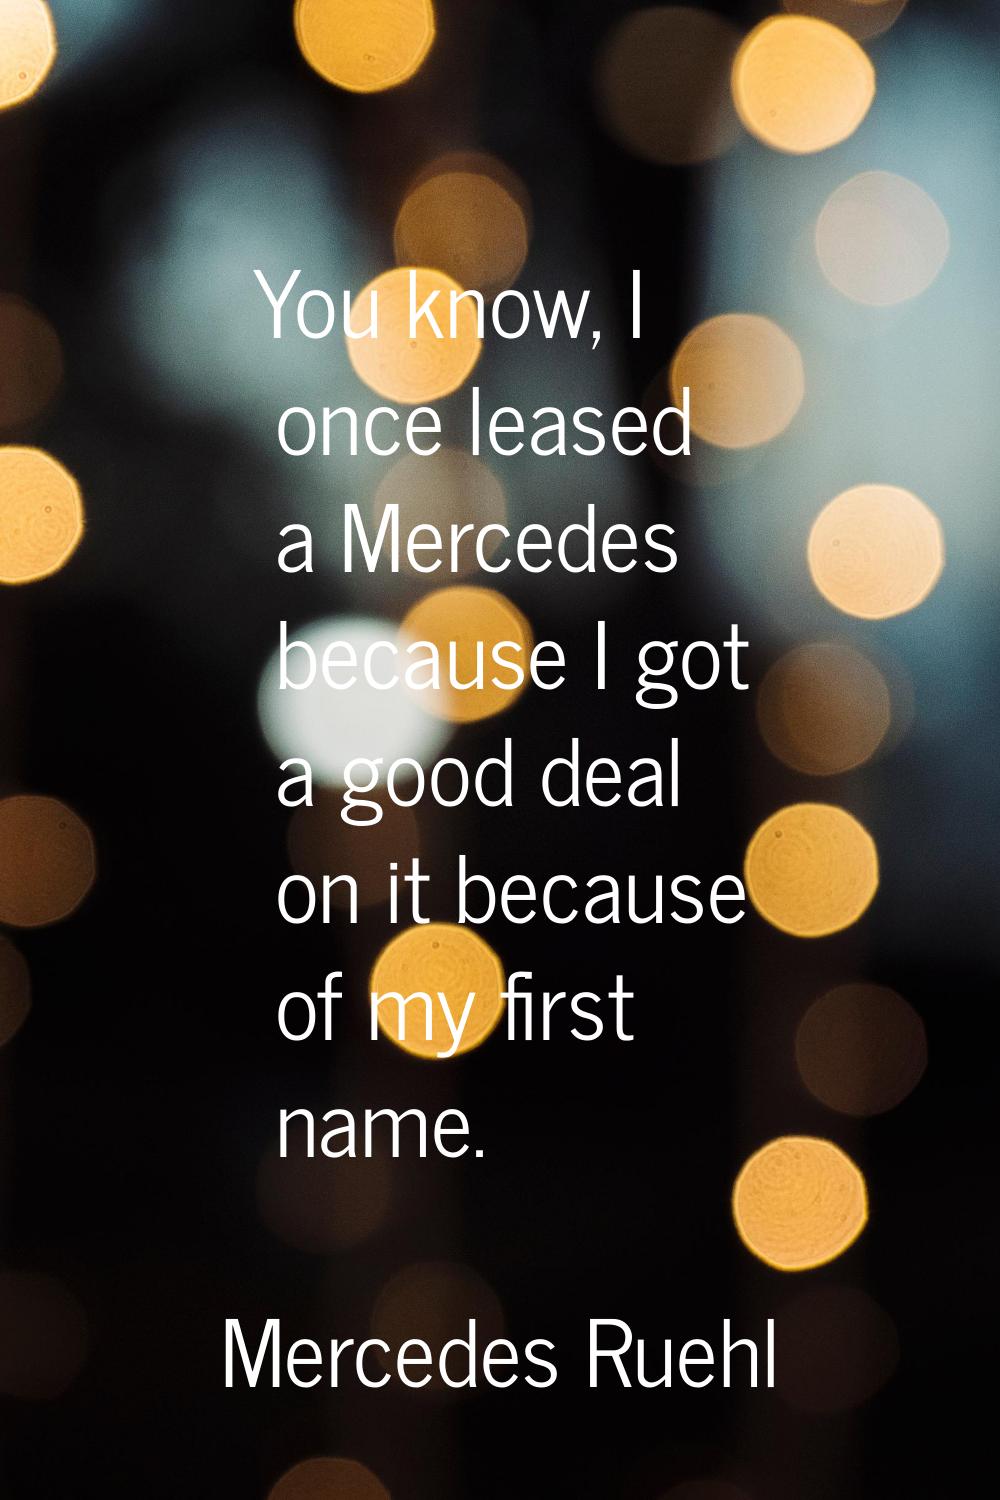 You know, I once leased a Mercedes because I got a good deal on it because of my first name.